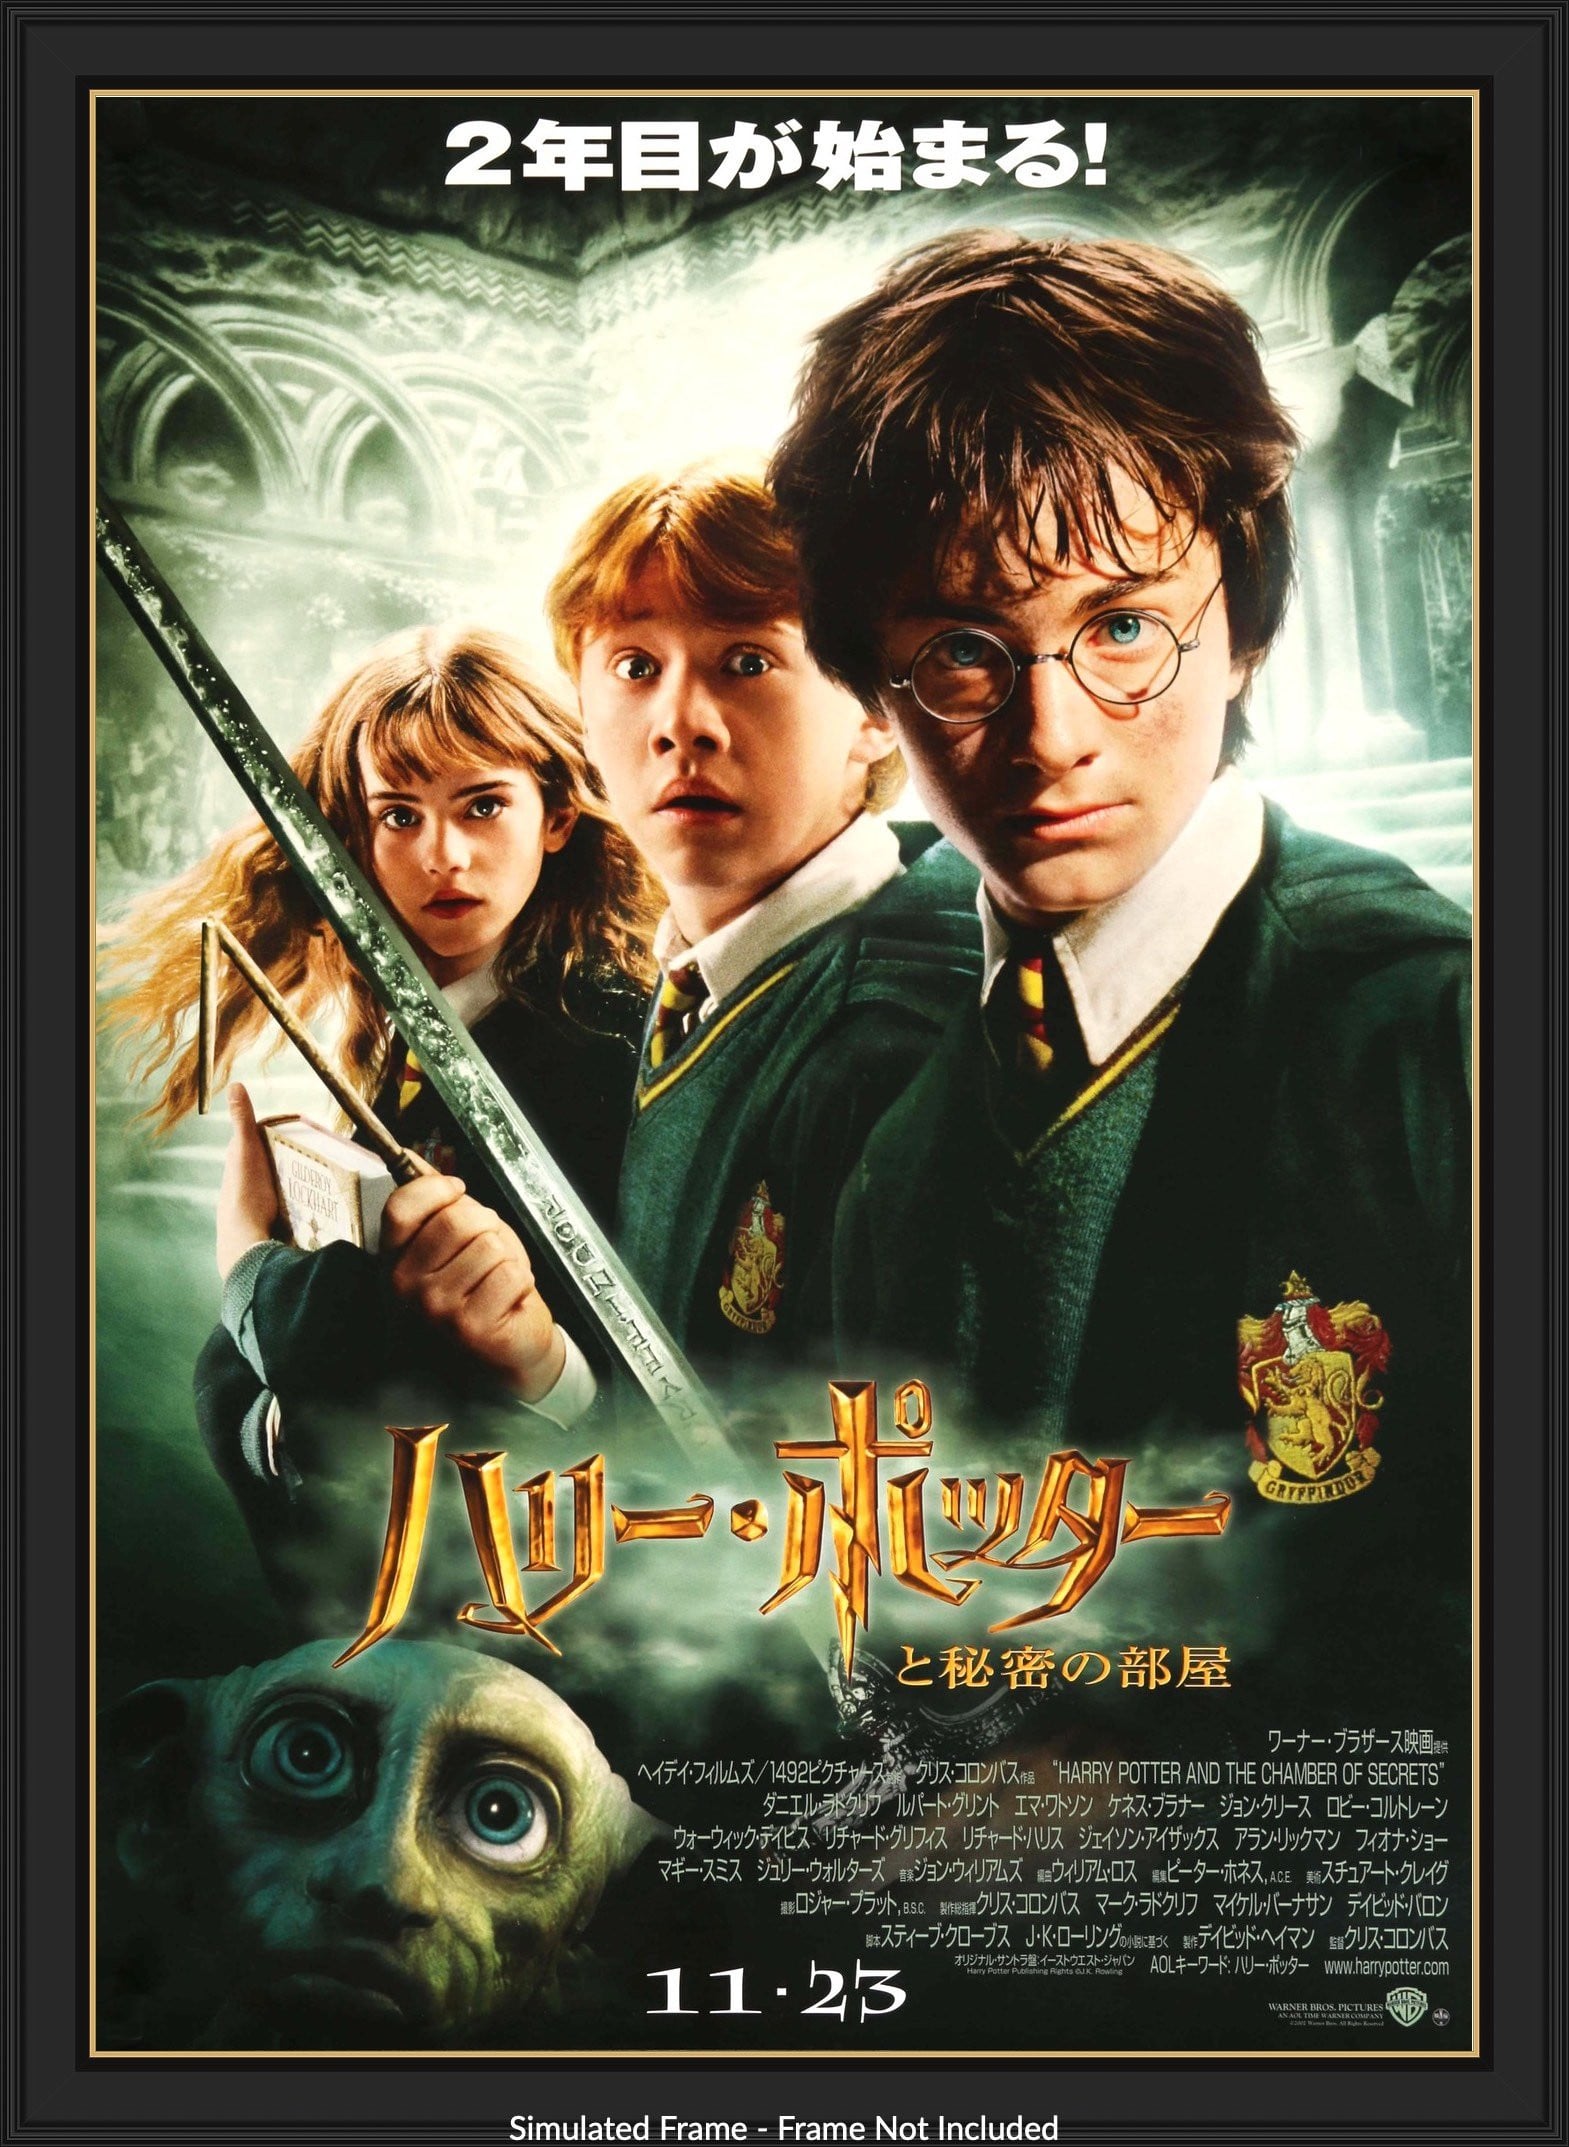 Harry Potter and the Chamber of Secrets (2002) original movie poster for sale at Original Film Art